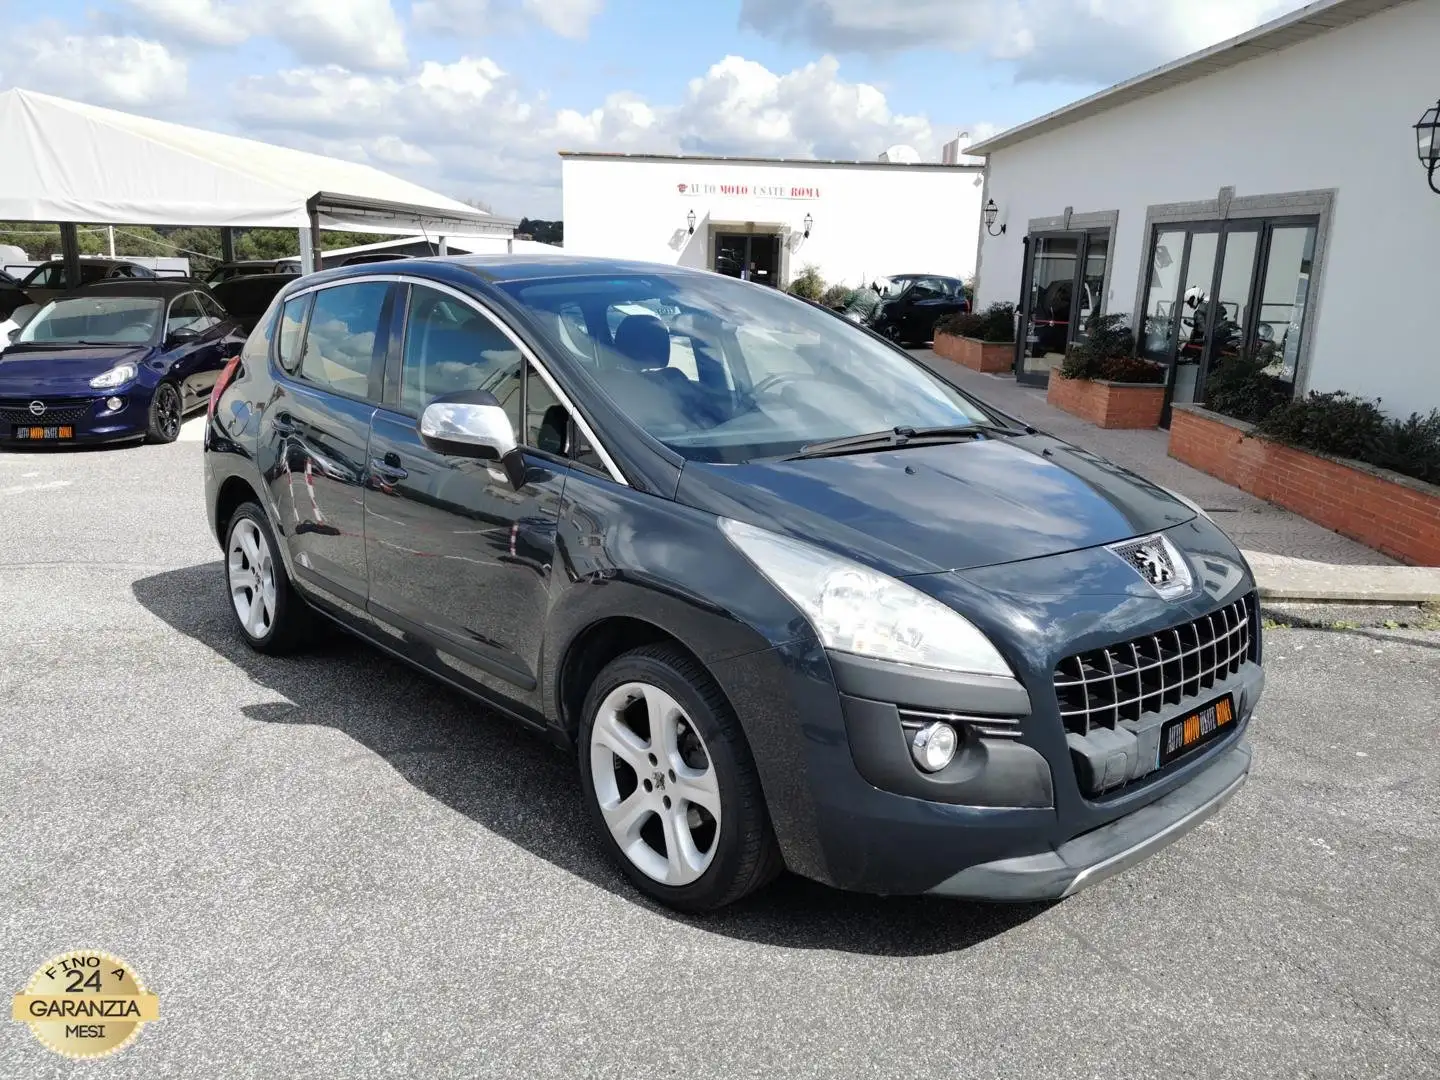 Peugeot 3008 1.6 HDi 110CV Outdoor - RATE AUTO MOTO SCOOTER Blauw - 1